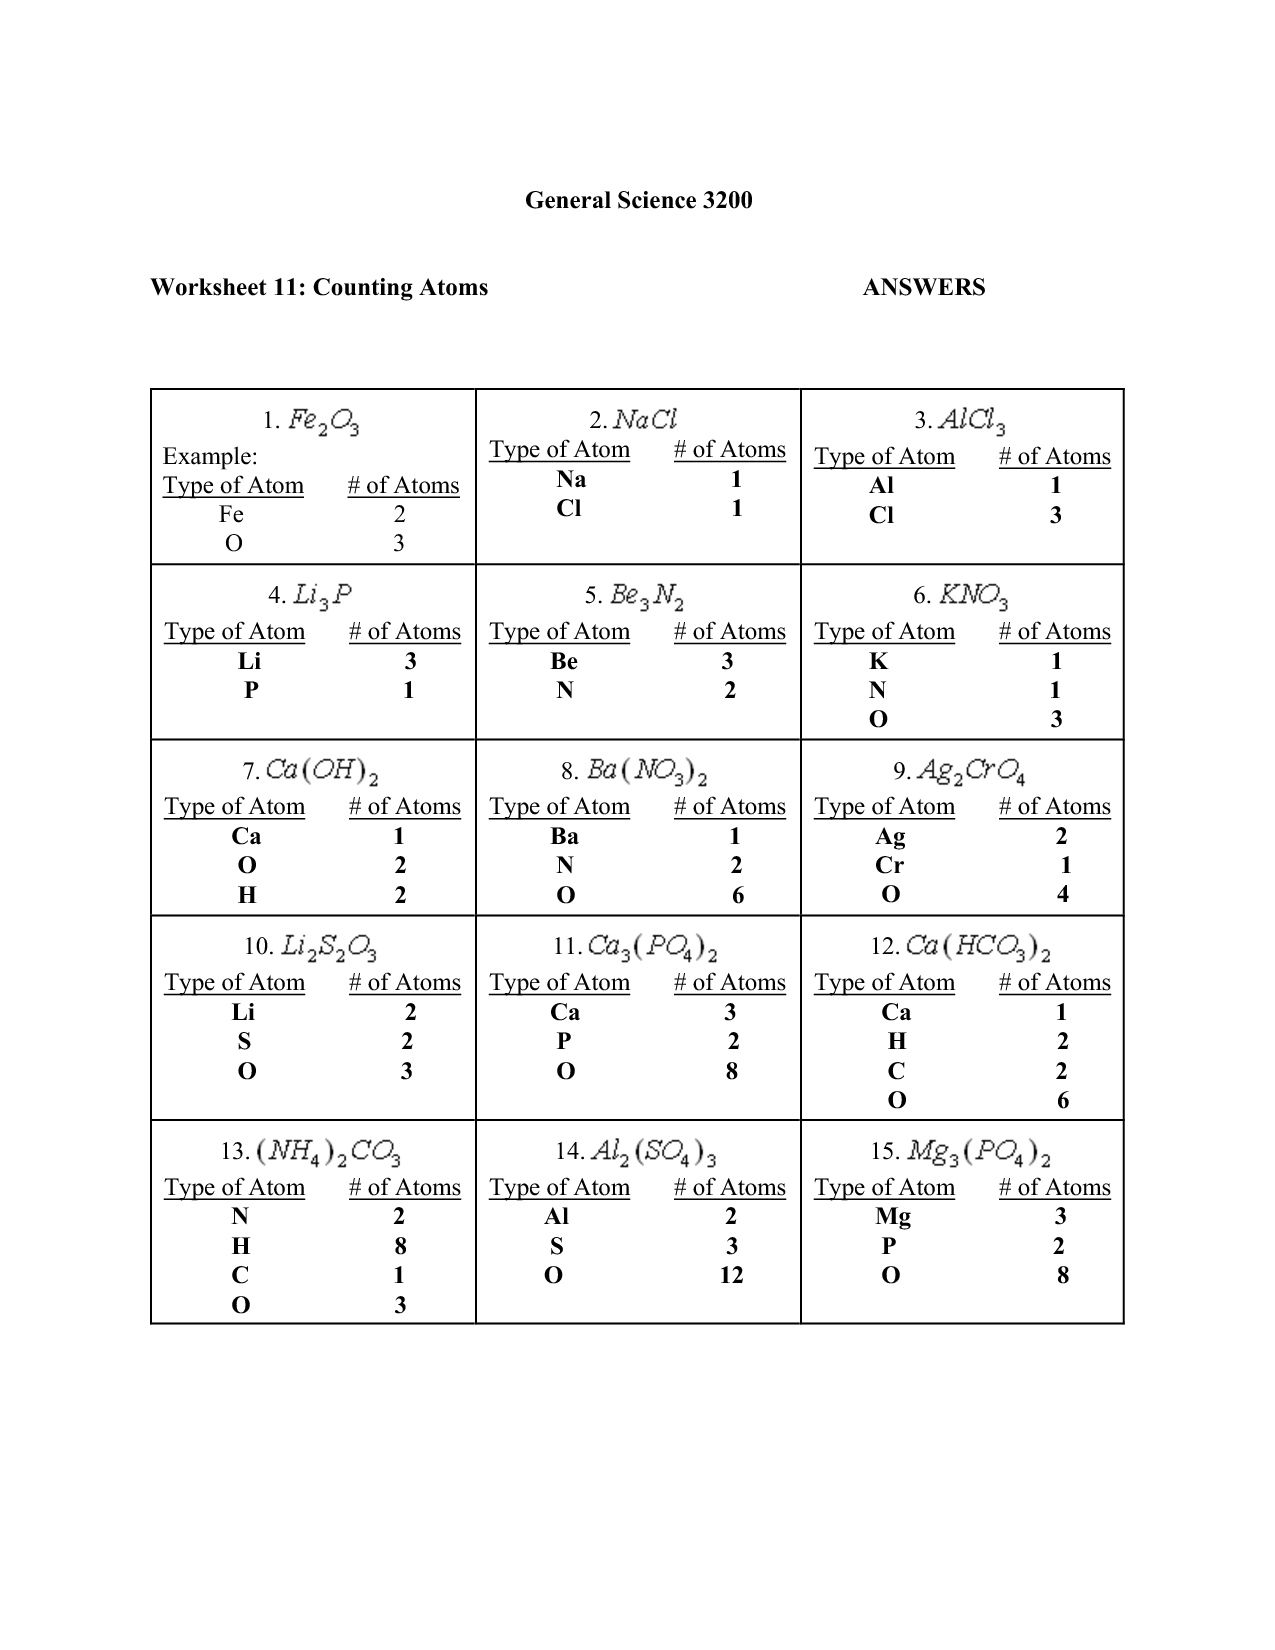 Counting Atoms Worksheet Answer Key Image